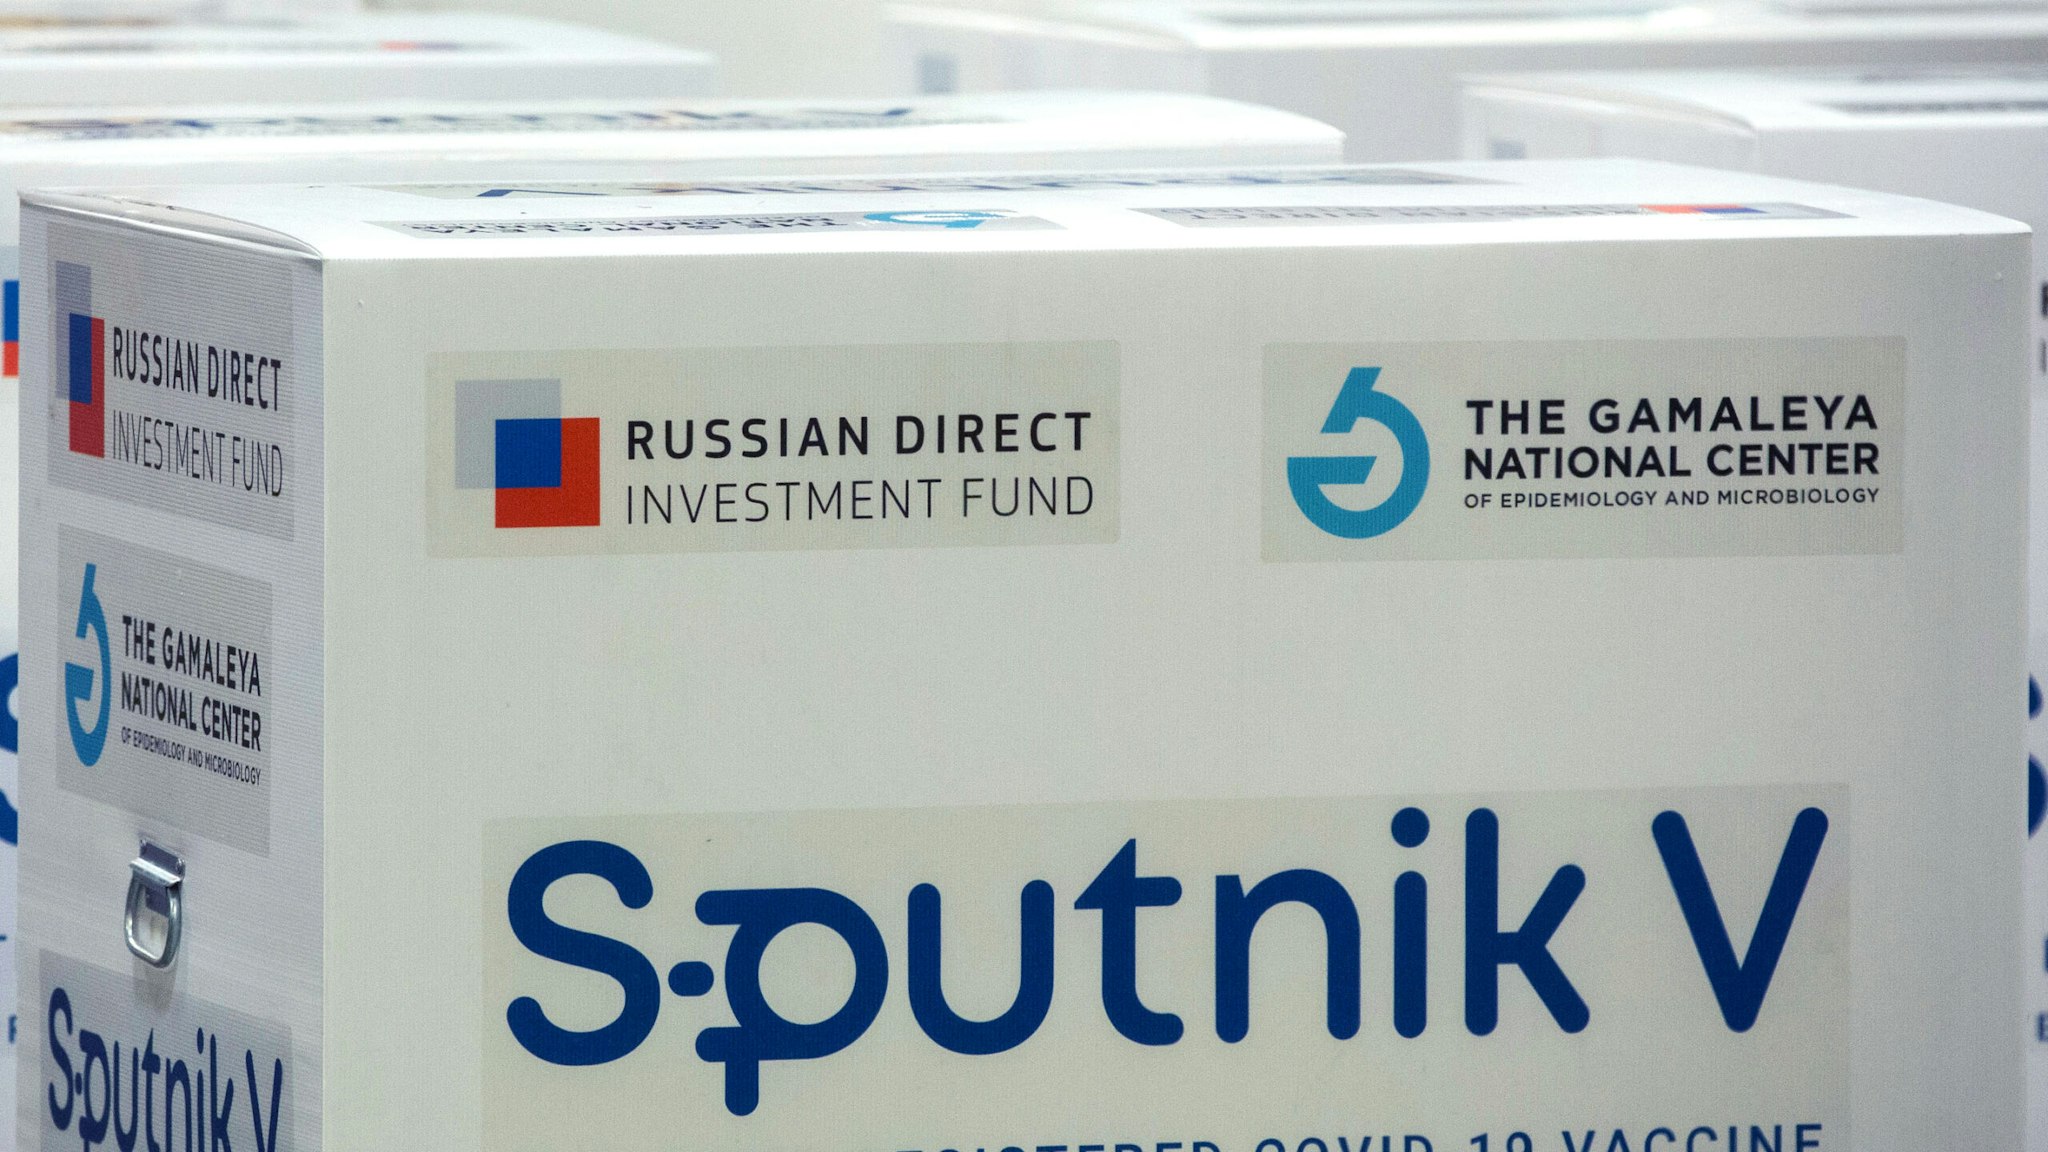 Branding reading 'The first registered Covid-19 vaccine' on boxes of the Sputnik V COVID-19 vaccine, developed by the Gamaleya National Research Center for Epidemiology and Microbiology and the Russian Direct Investment Fund (RDIF), at the cargo terminal at Sheremetyevo International Airport OAO in Moscow, Russia, on Thursday, Feb. 11, 2021. Montenegro and St. Vincent and the Grenadines approved Russian-developed vaccine for use, bringing total number of countries that have authorized it to 26, Russian Direct Investment Fund says in statement.